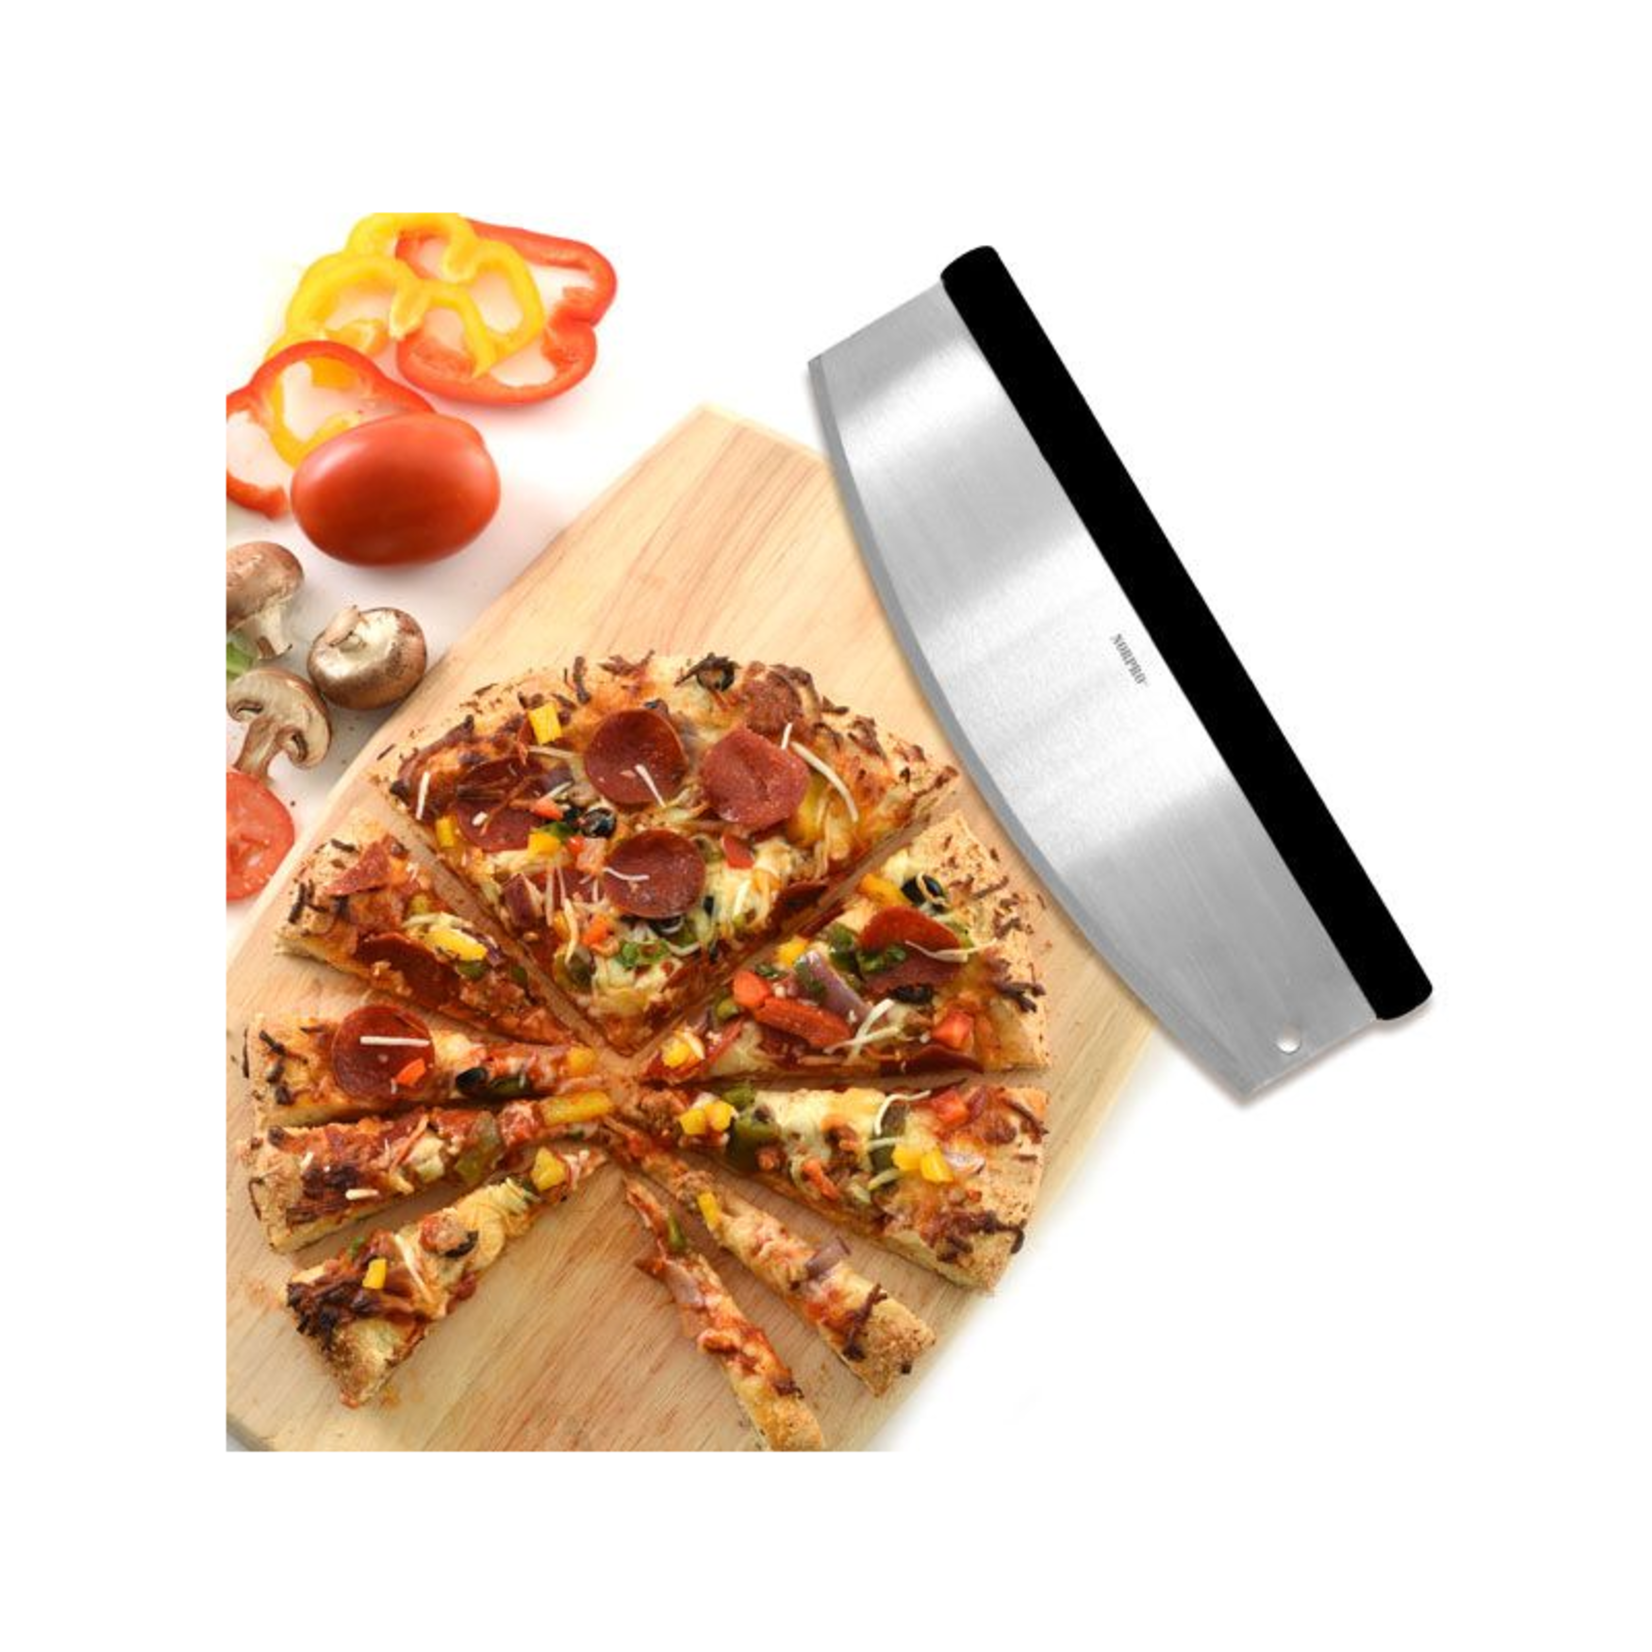 Norpro Stainless Steel Rocking Pizza Cutter